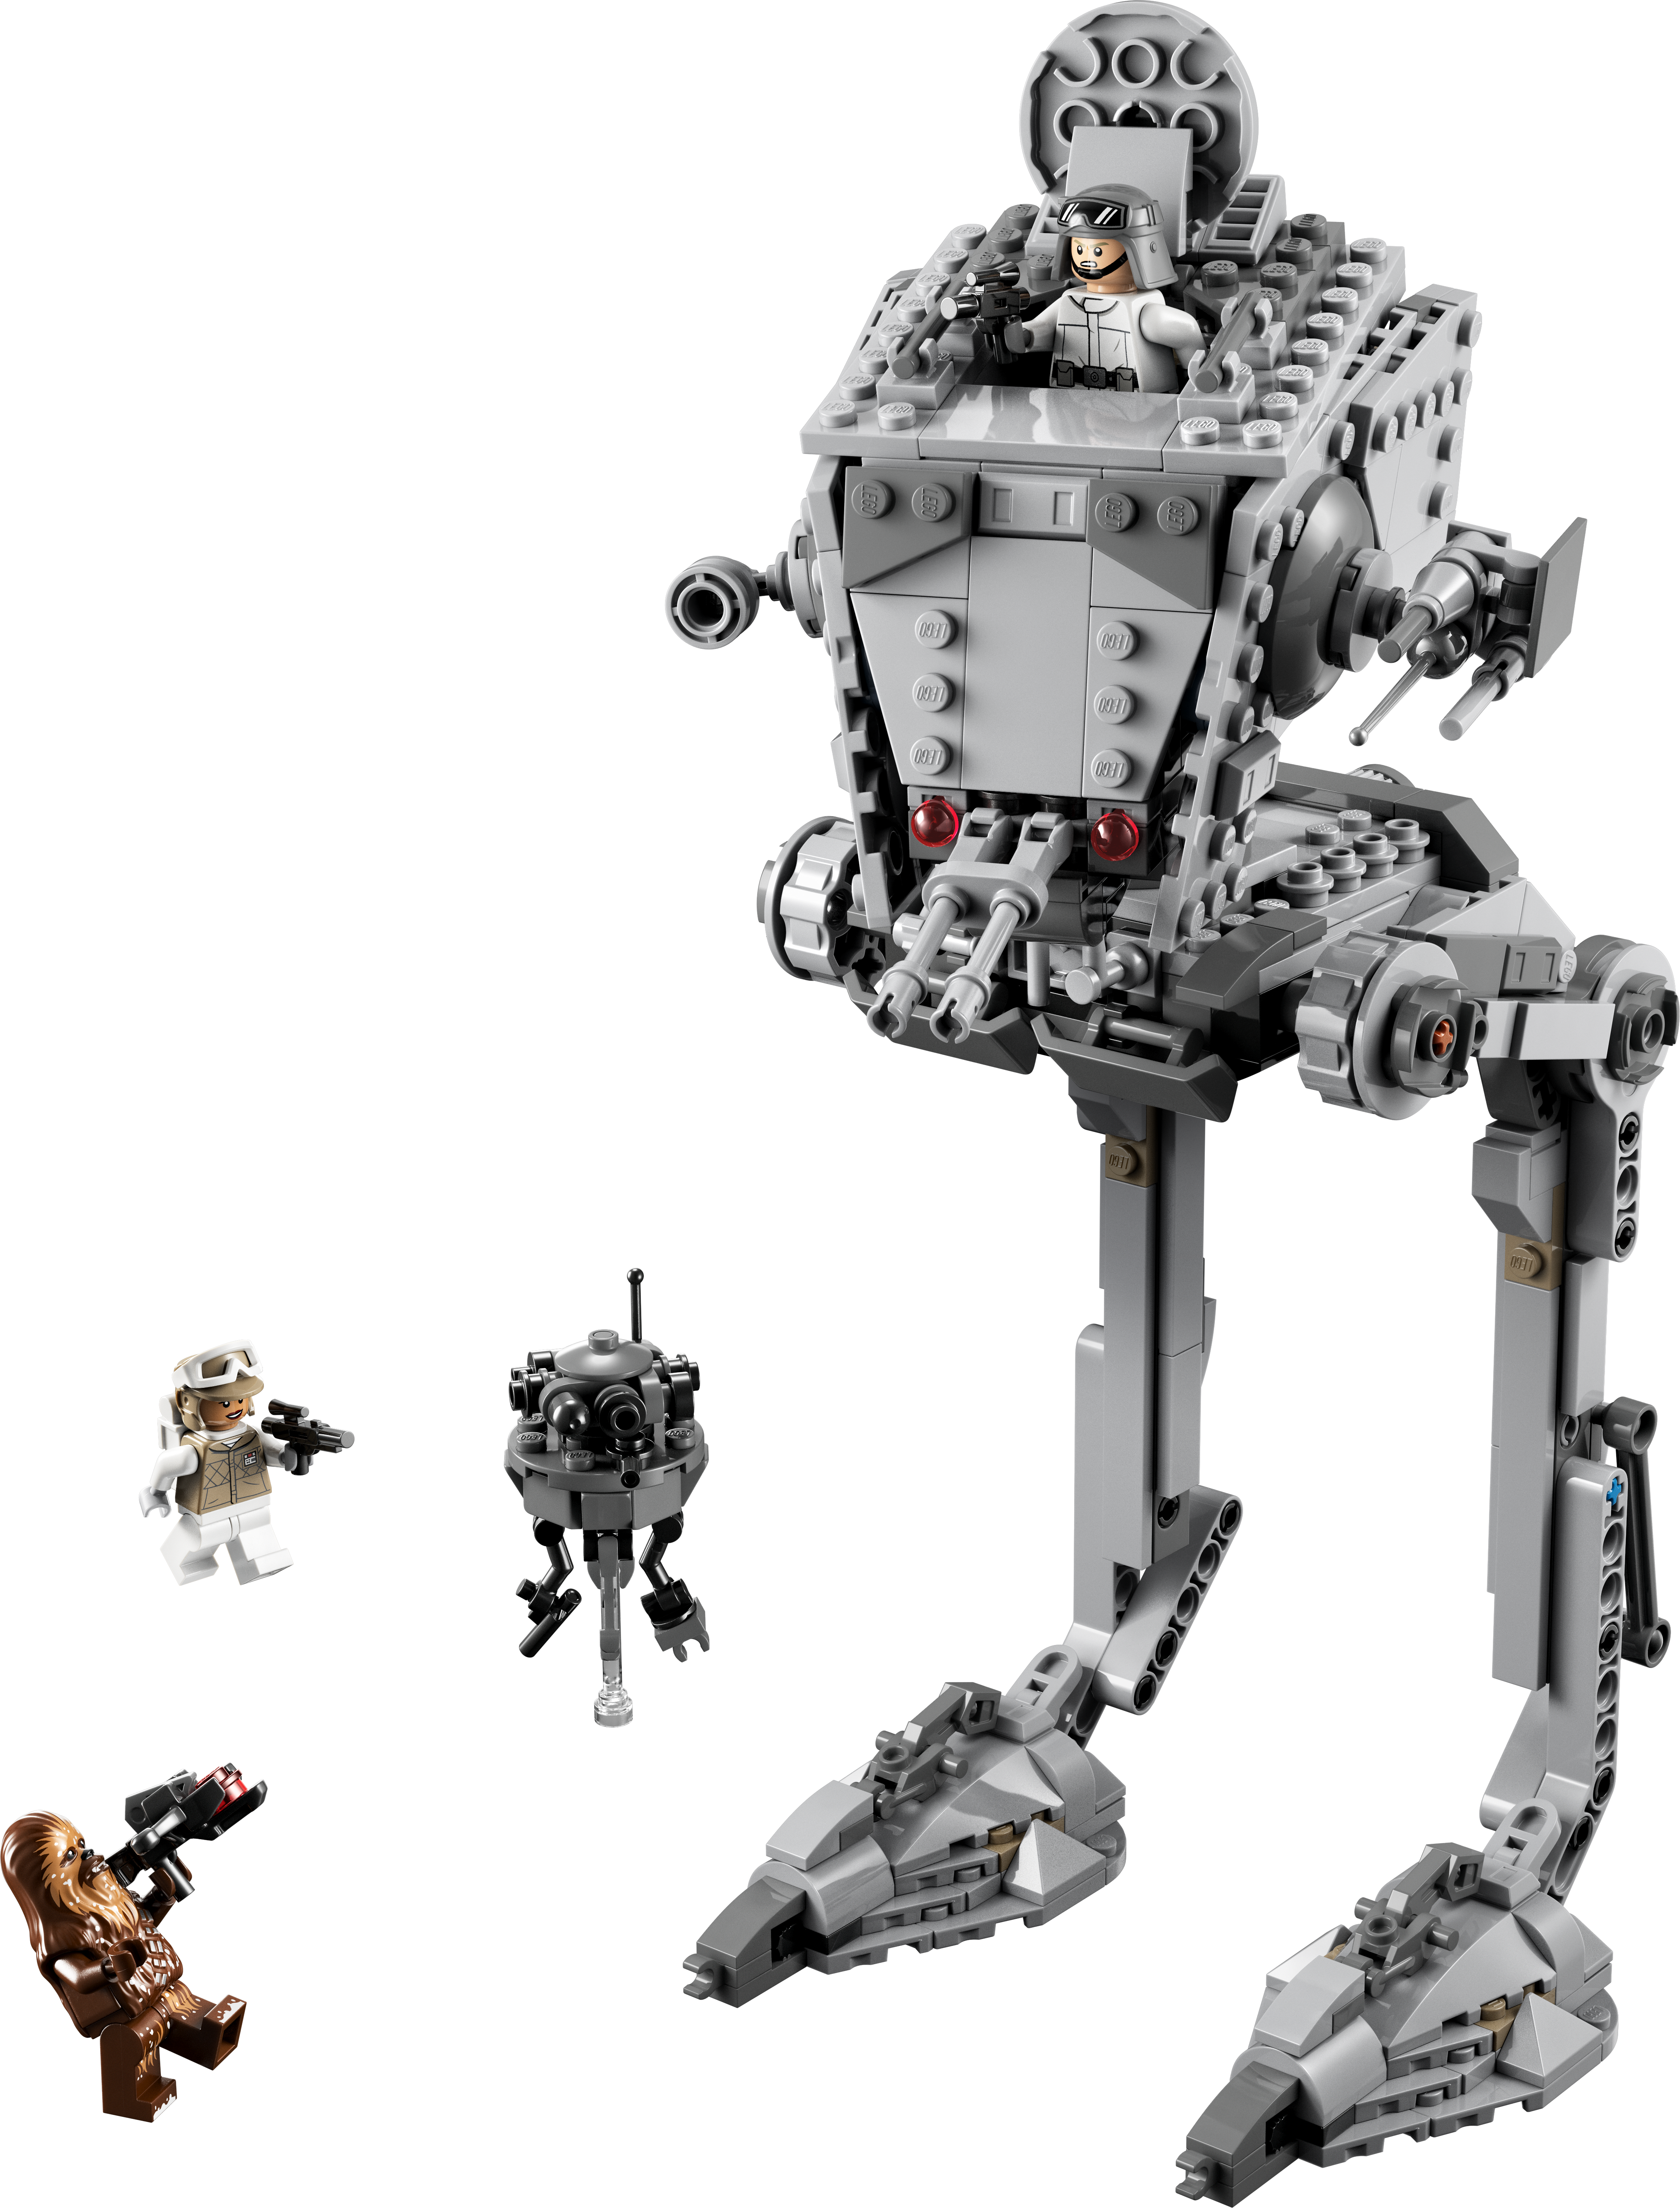 LEGO Star Wars Hoth at-ST Walker 75322 Building Toy for Kids with Chewbacca  Minifigure and Droid Figure, The Empire Strikes Back Model